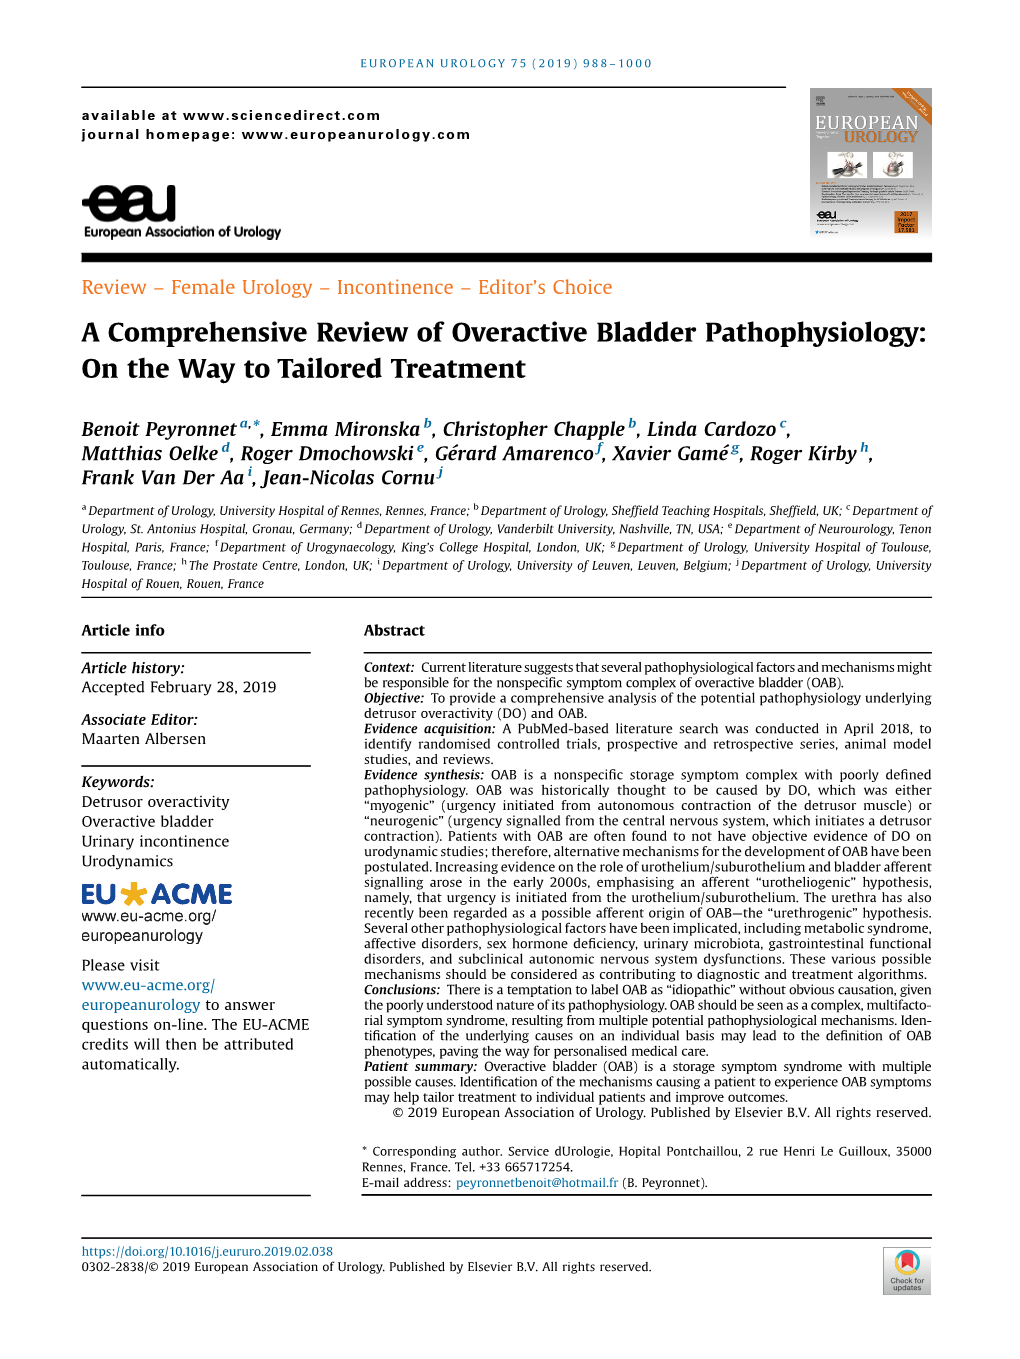 A Comprehensive Review of Overactive Bladder Pathophysiology: on the Way to Tailored Treatment